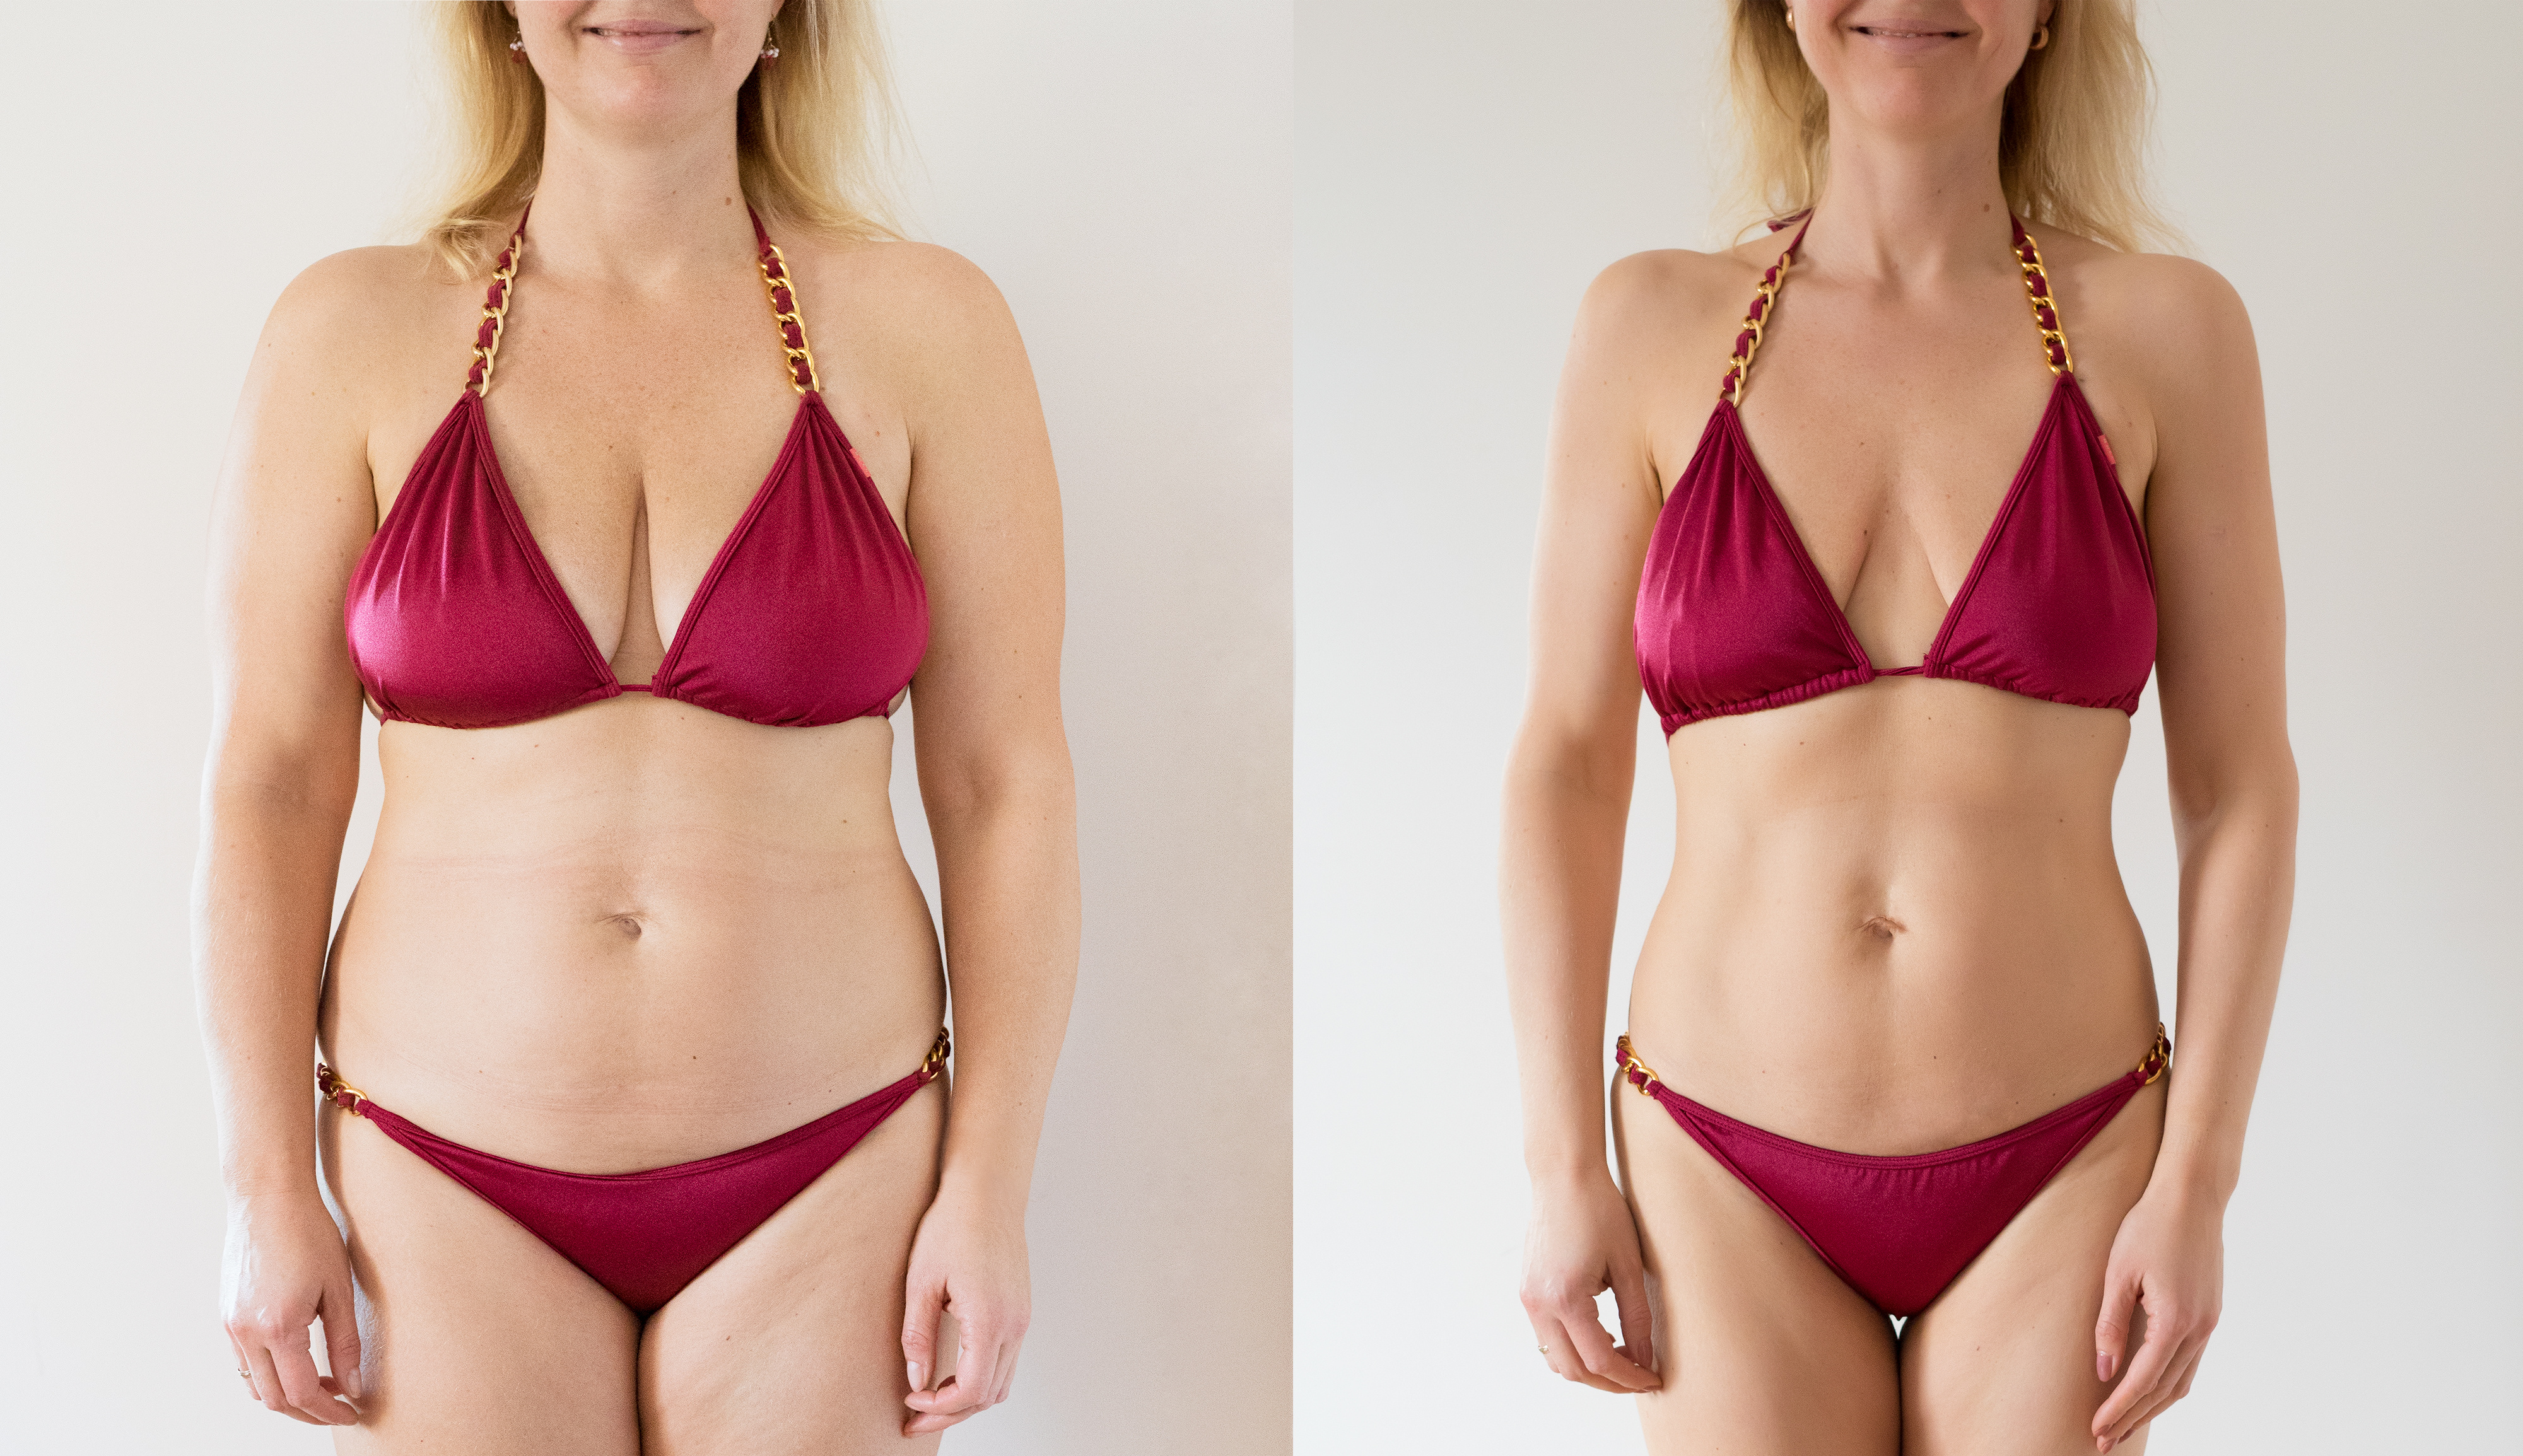 lose inches with Sculptra